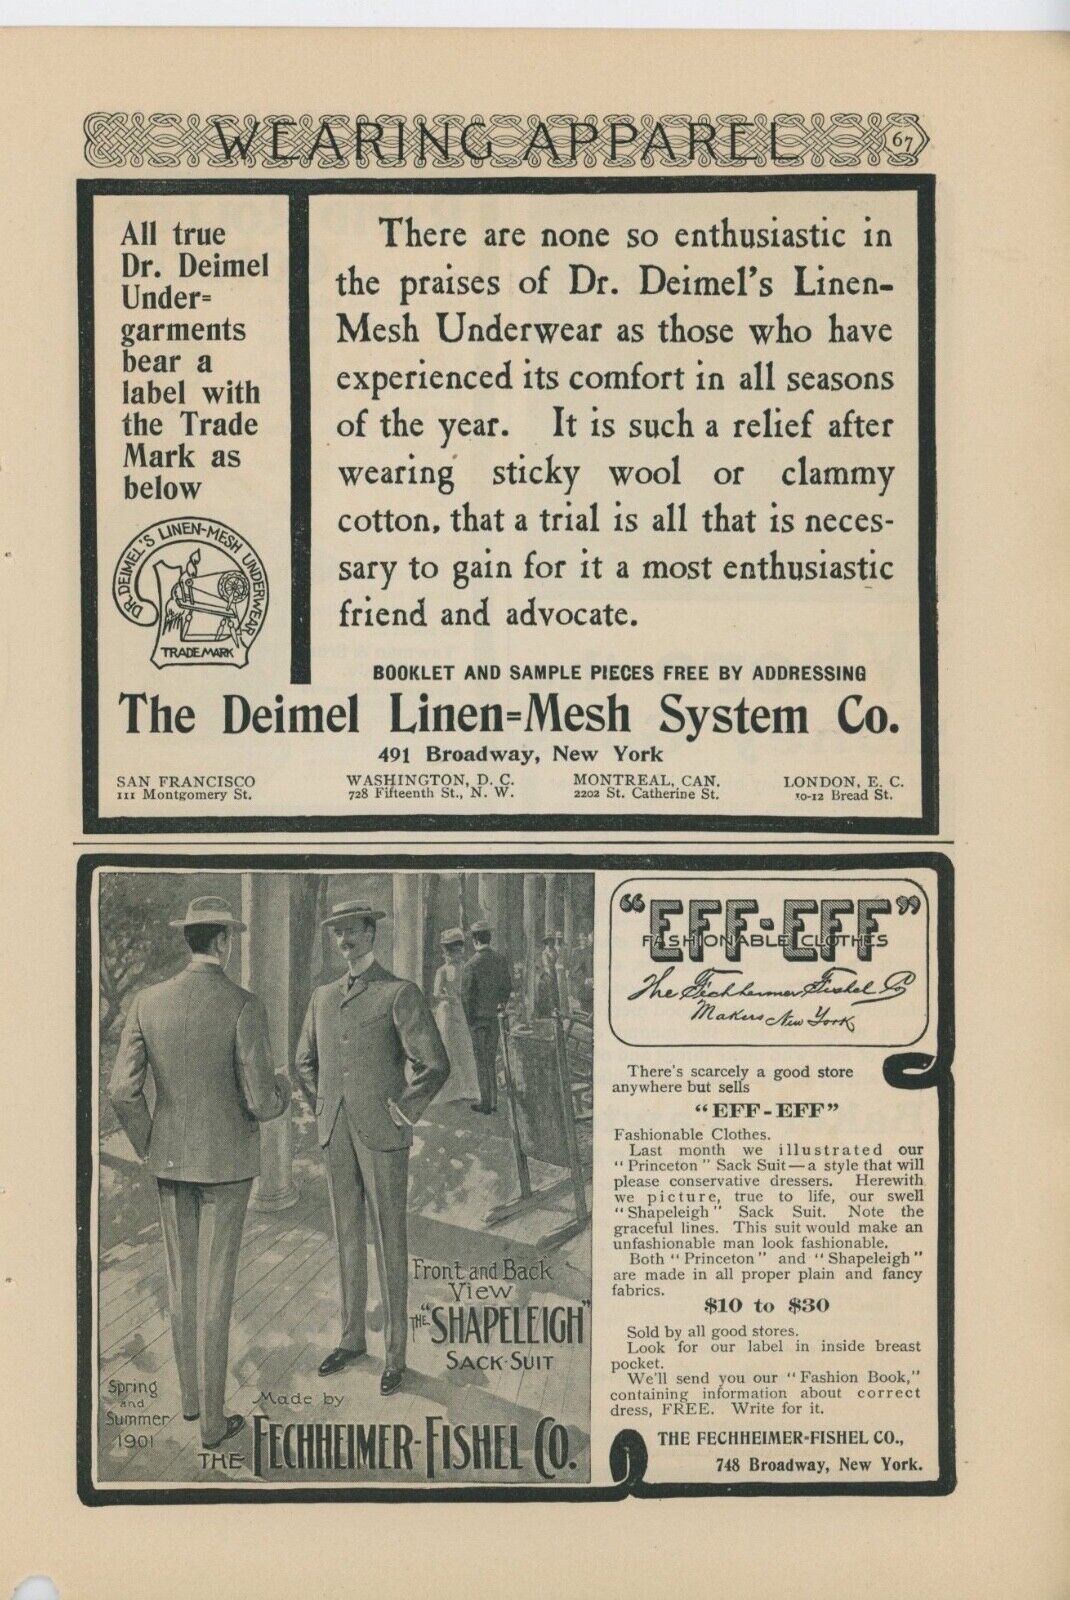 1901 Fechheimer Fishel Co Vintage Clothing Ad Eff Off Brand Shapeleigh Suit